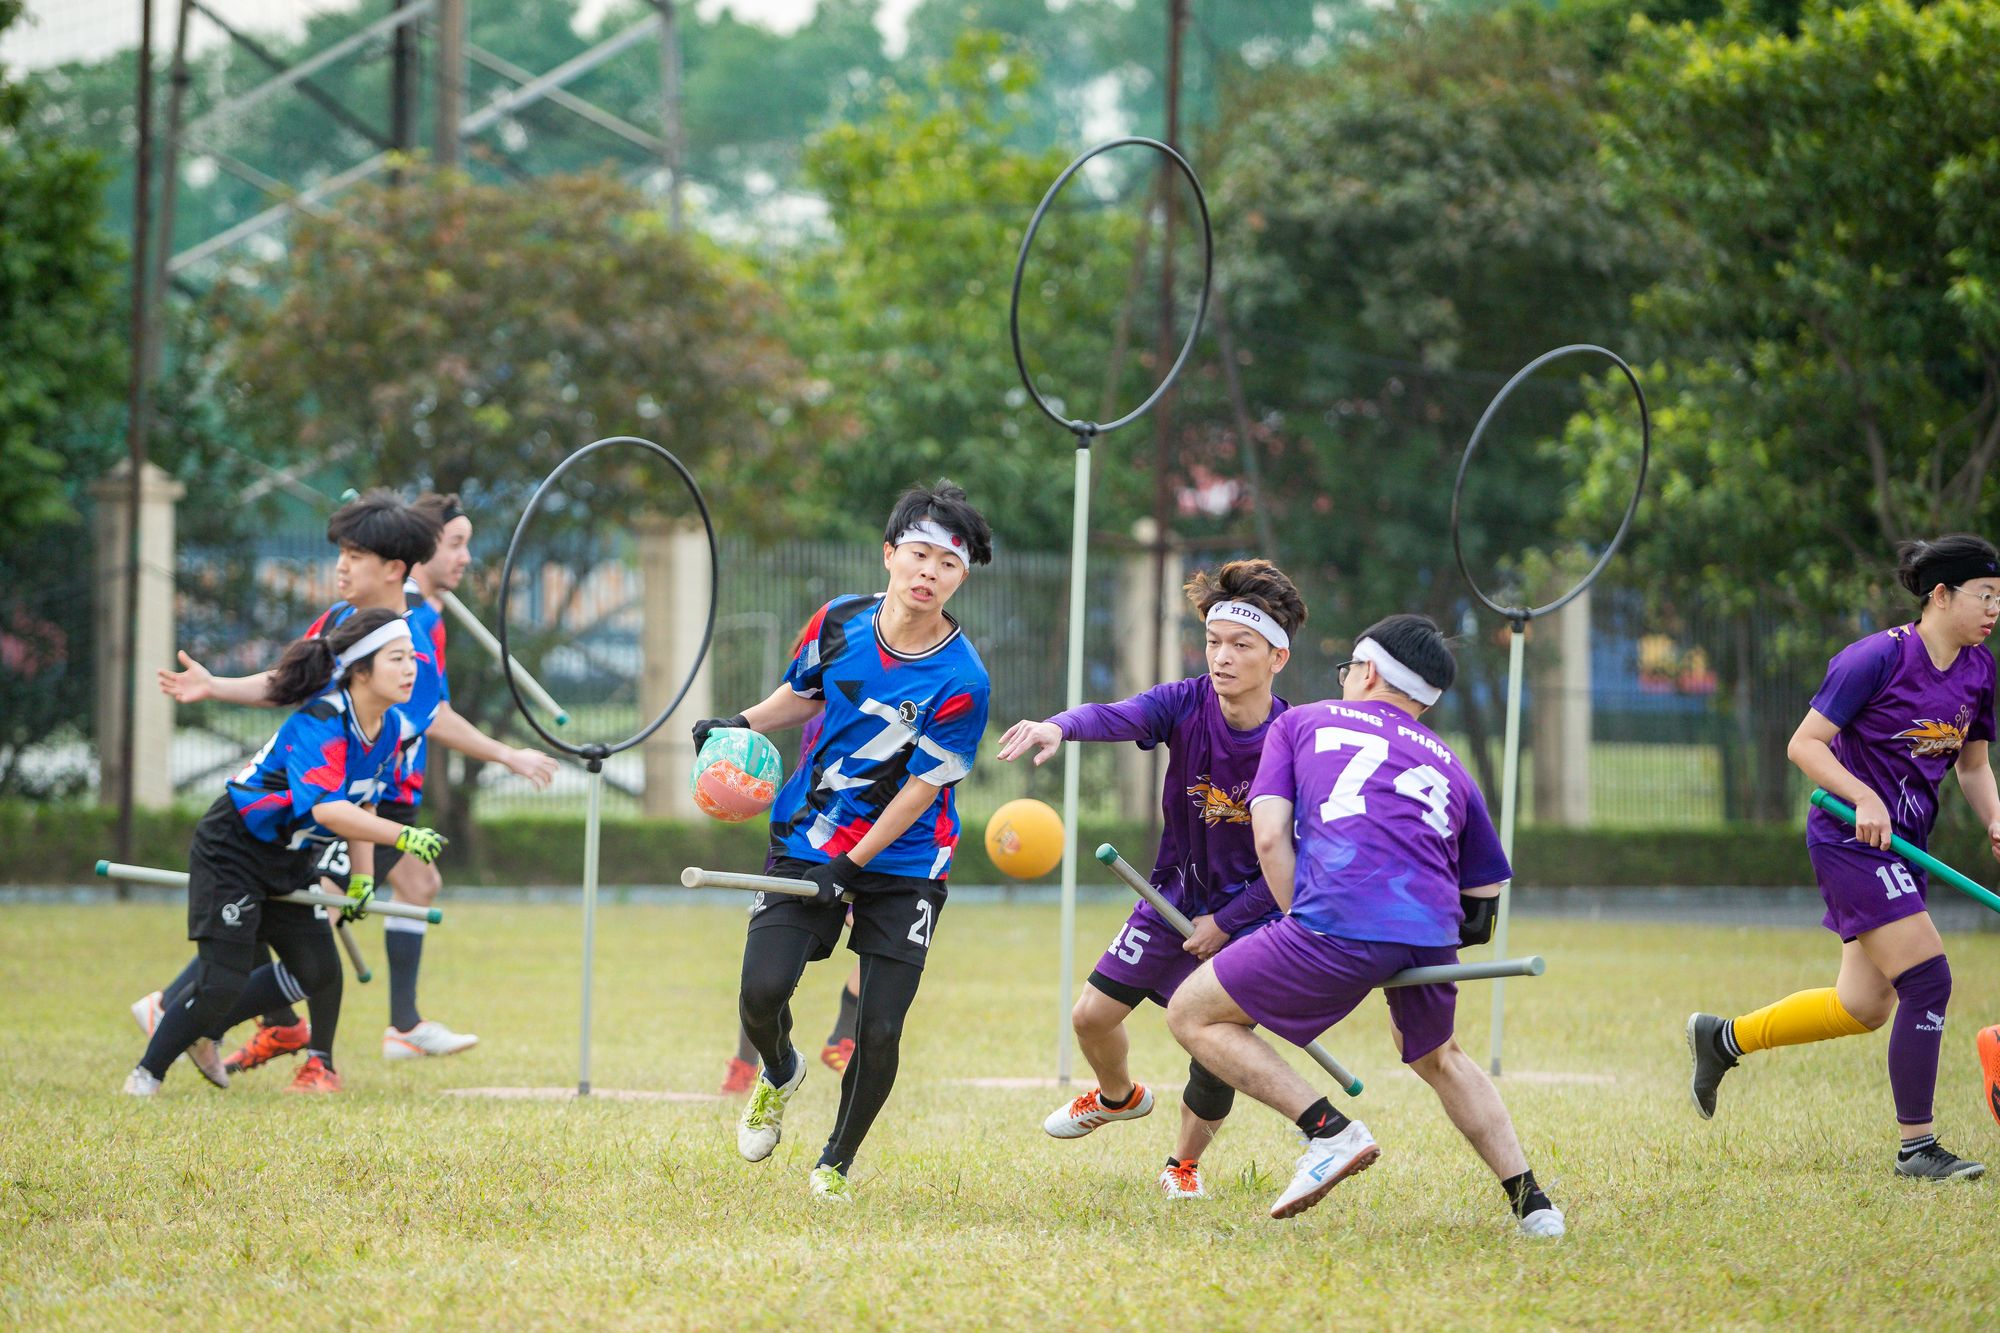 HKQA's Chris LAU and Thomas AU attended the Asian-Pacific Quadball Cup 2022 in Hanoi, Vietnam